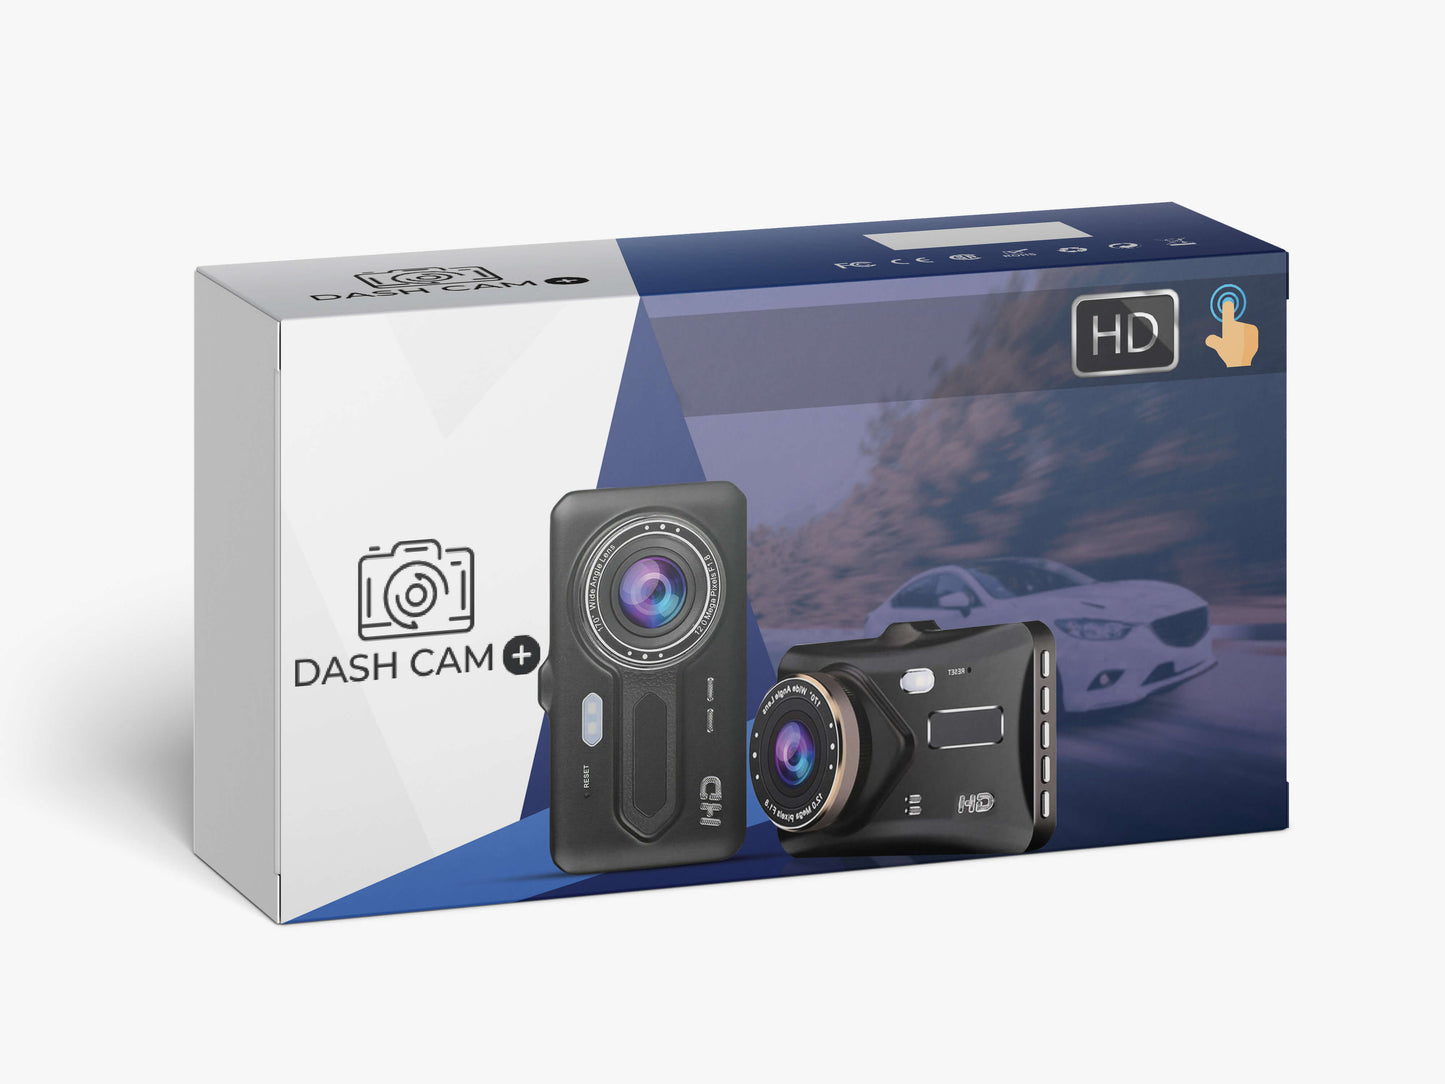 Dashcam Pro - Motion Detection, Easy to Install, 4.0" LCD, 170° Wide Angle, 1080p Resolution